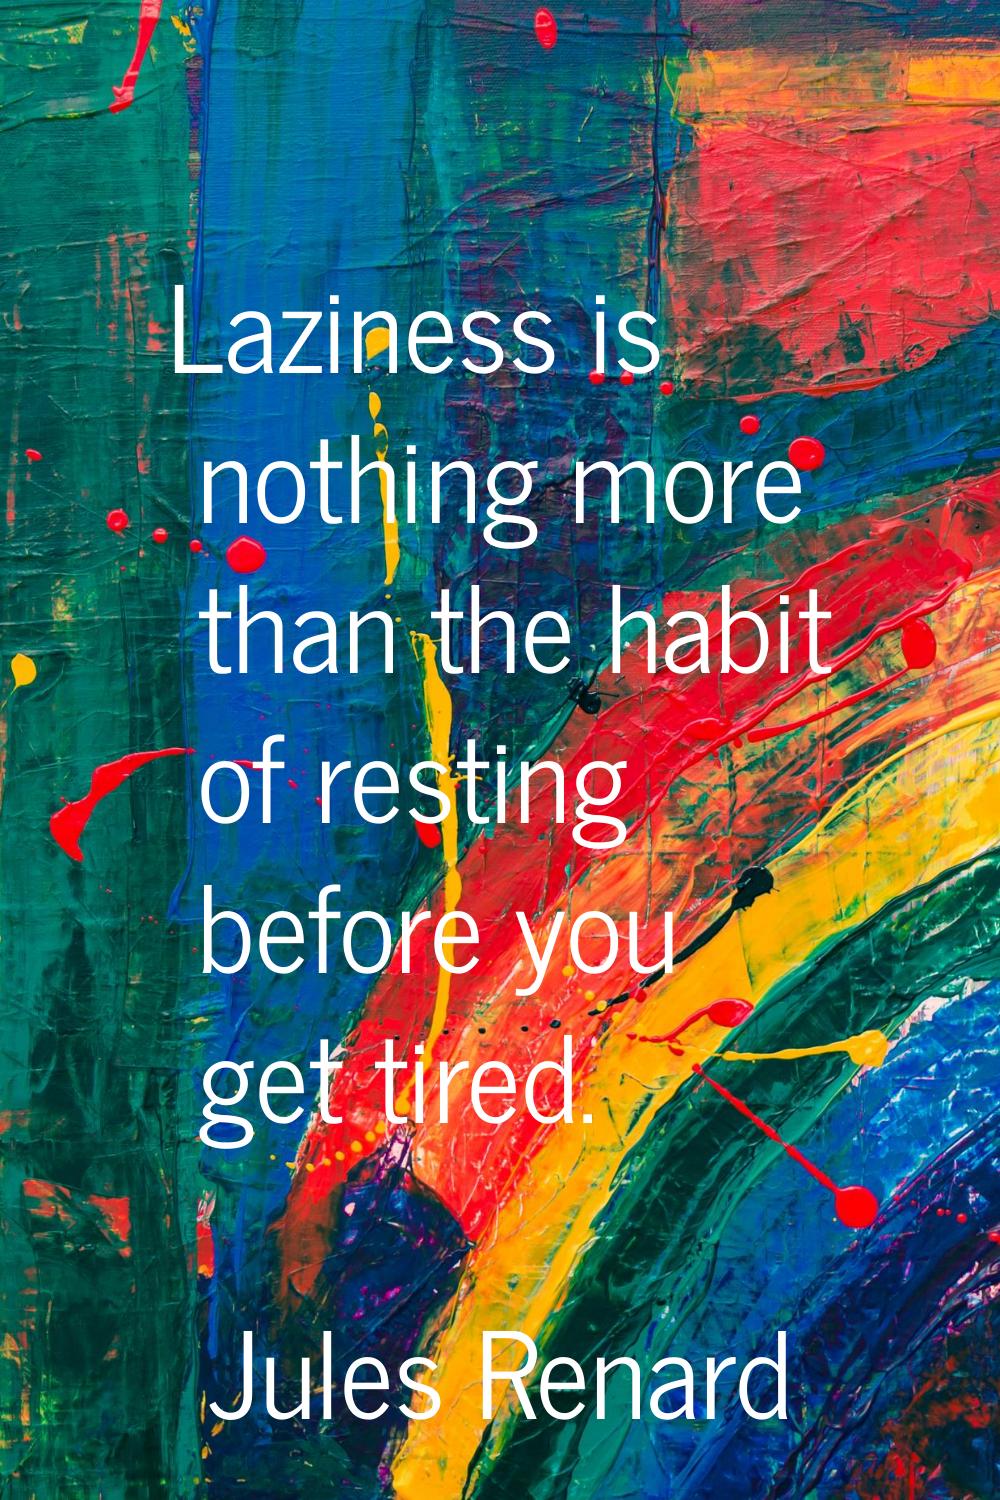 Laziness is nothing more than the habit of resting before you get tired.